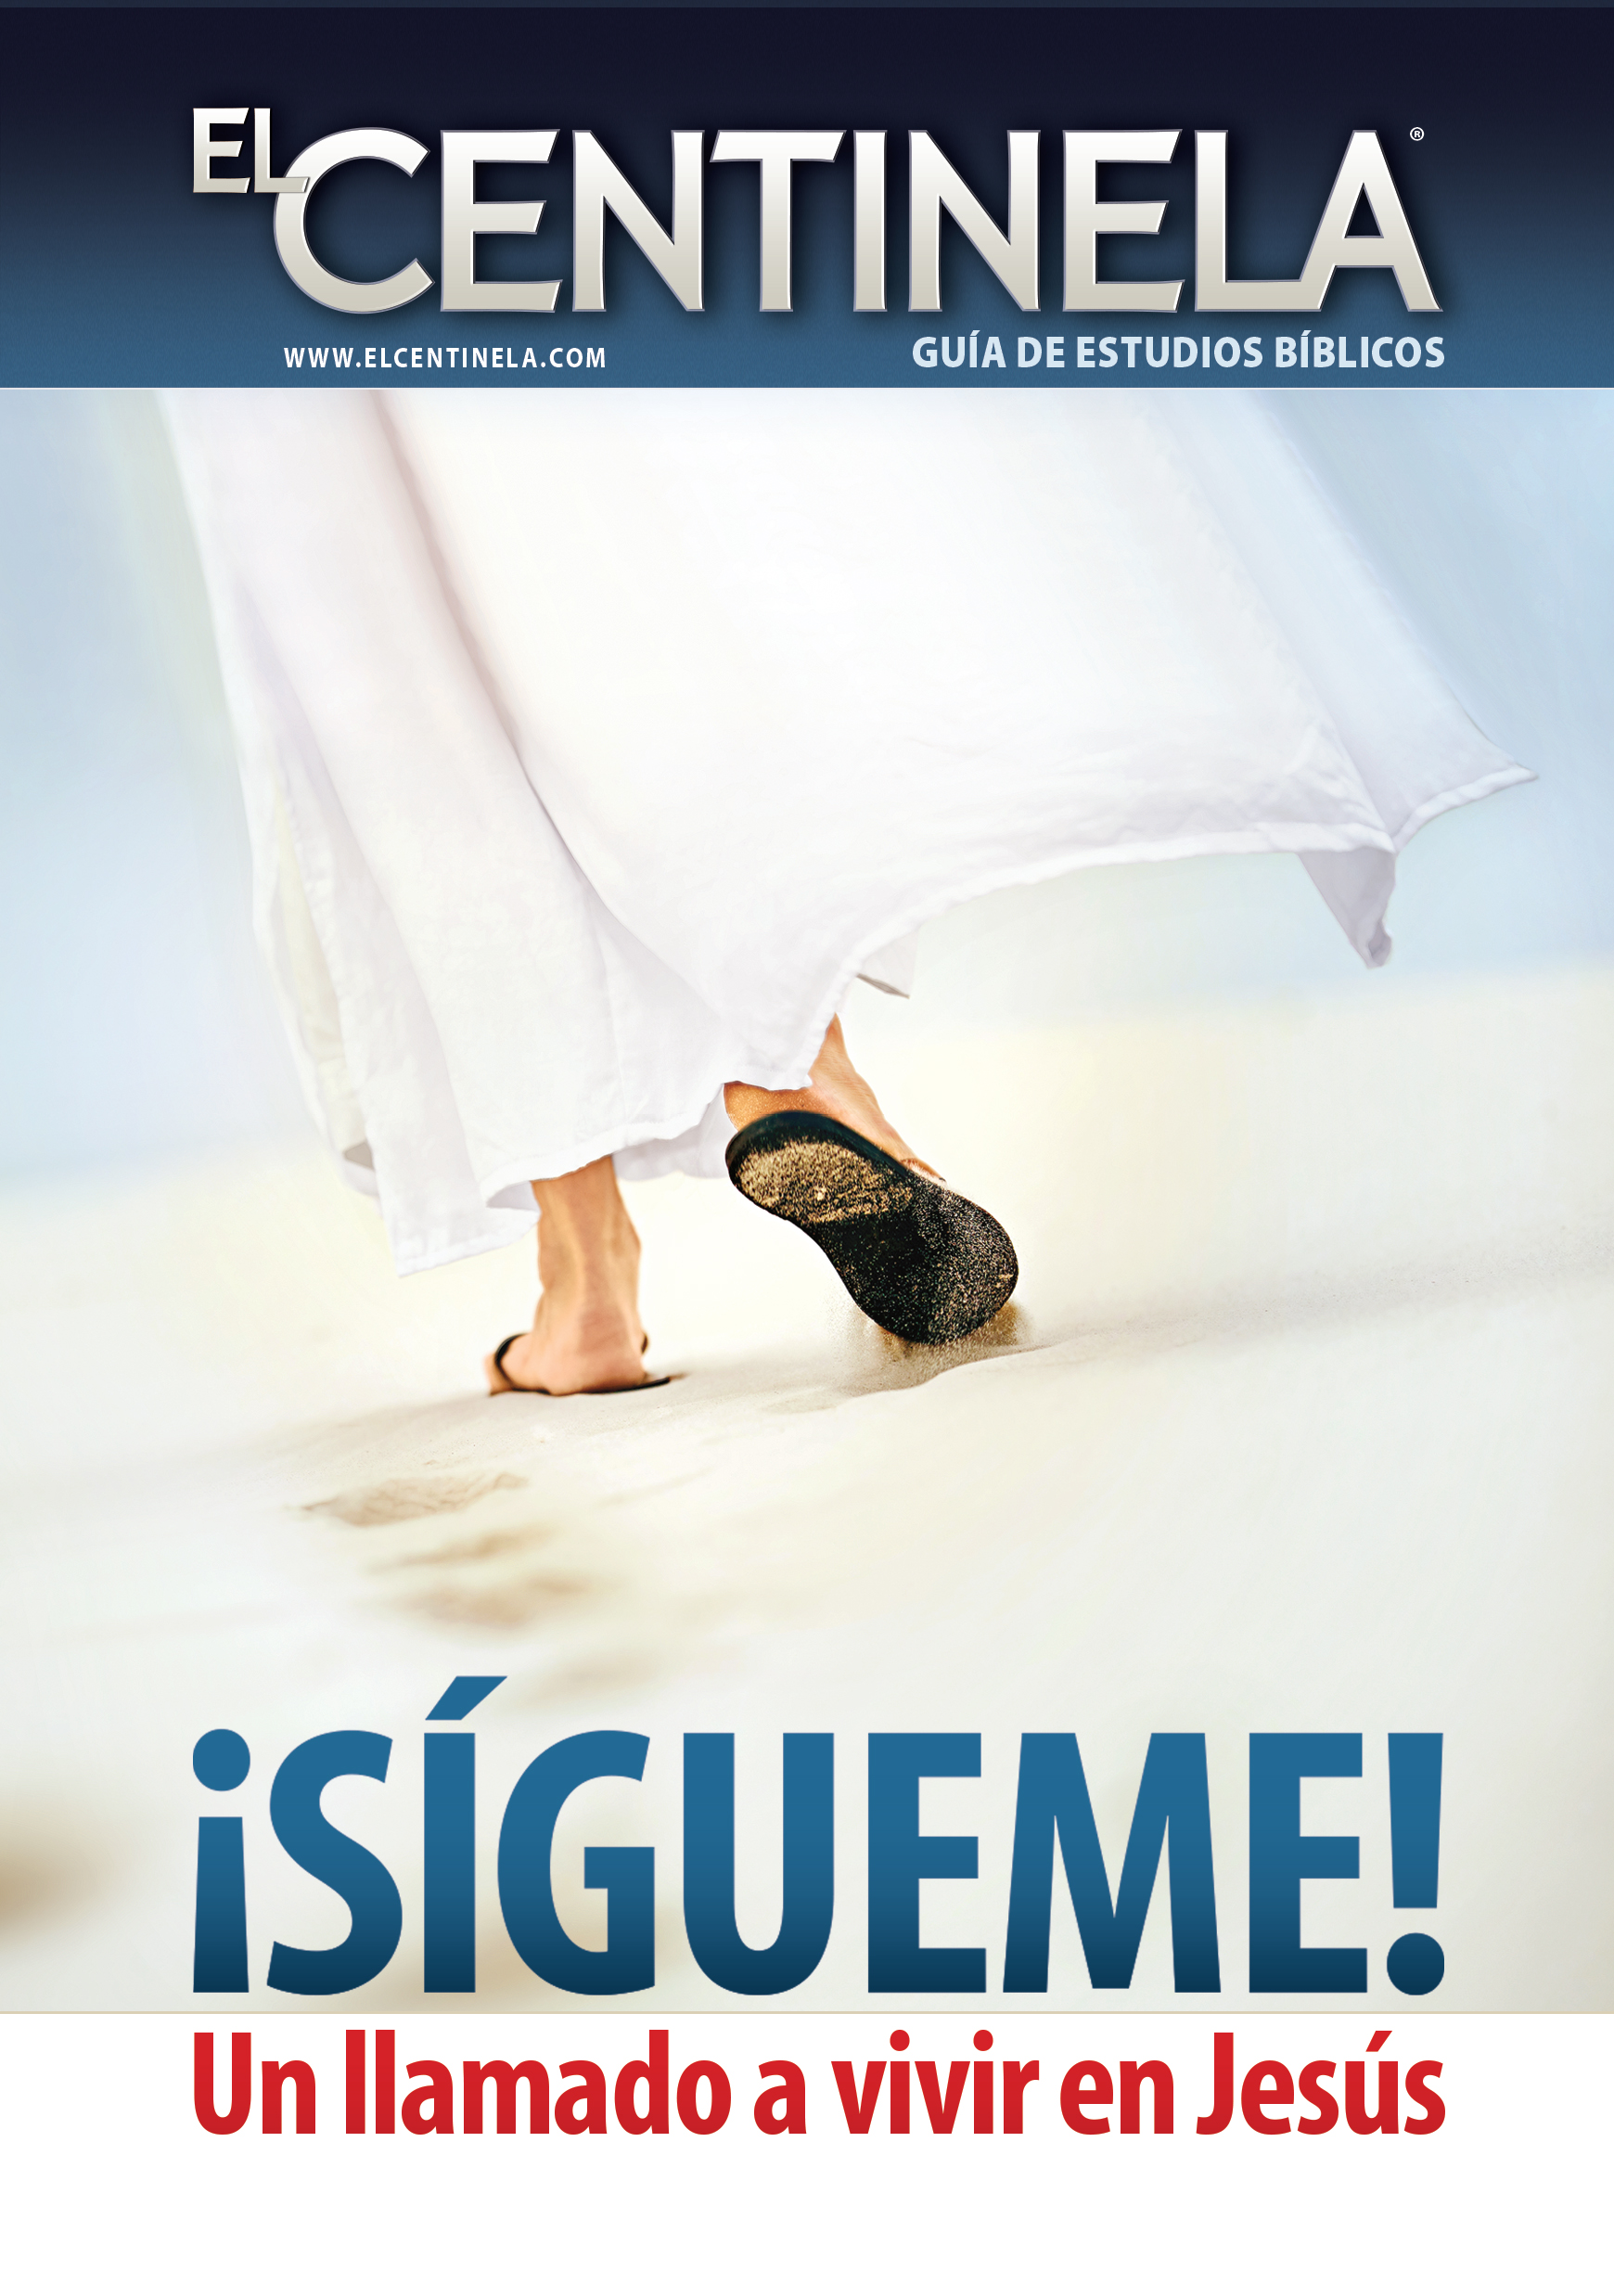 Book cover for Sígueme, un llamado a vivir en Jesús. Jesus walking on the sand in sandals and a white robe, showing only his bottom half.